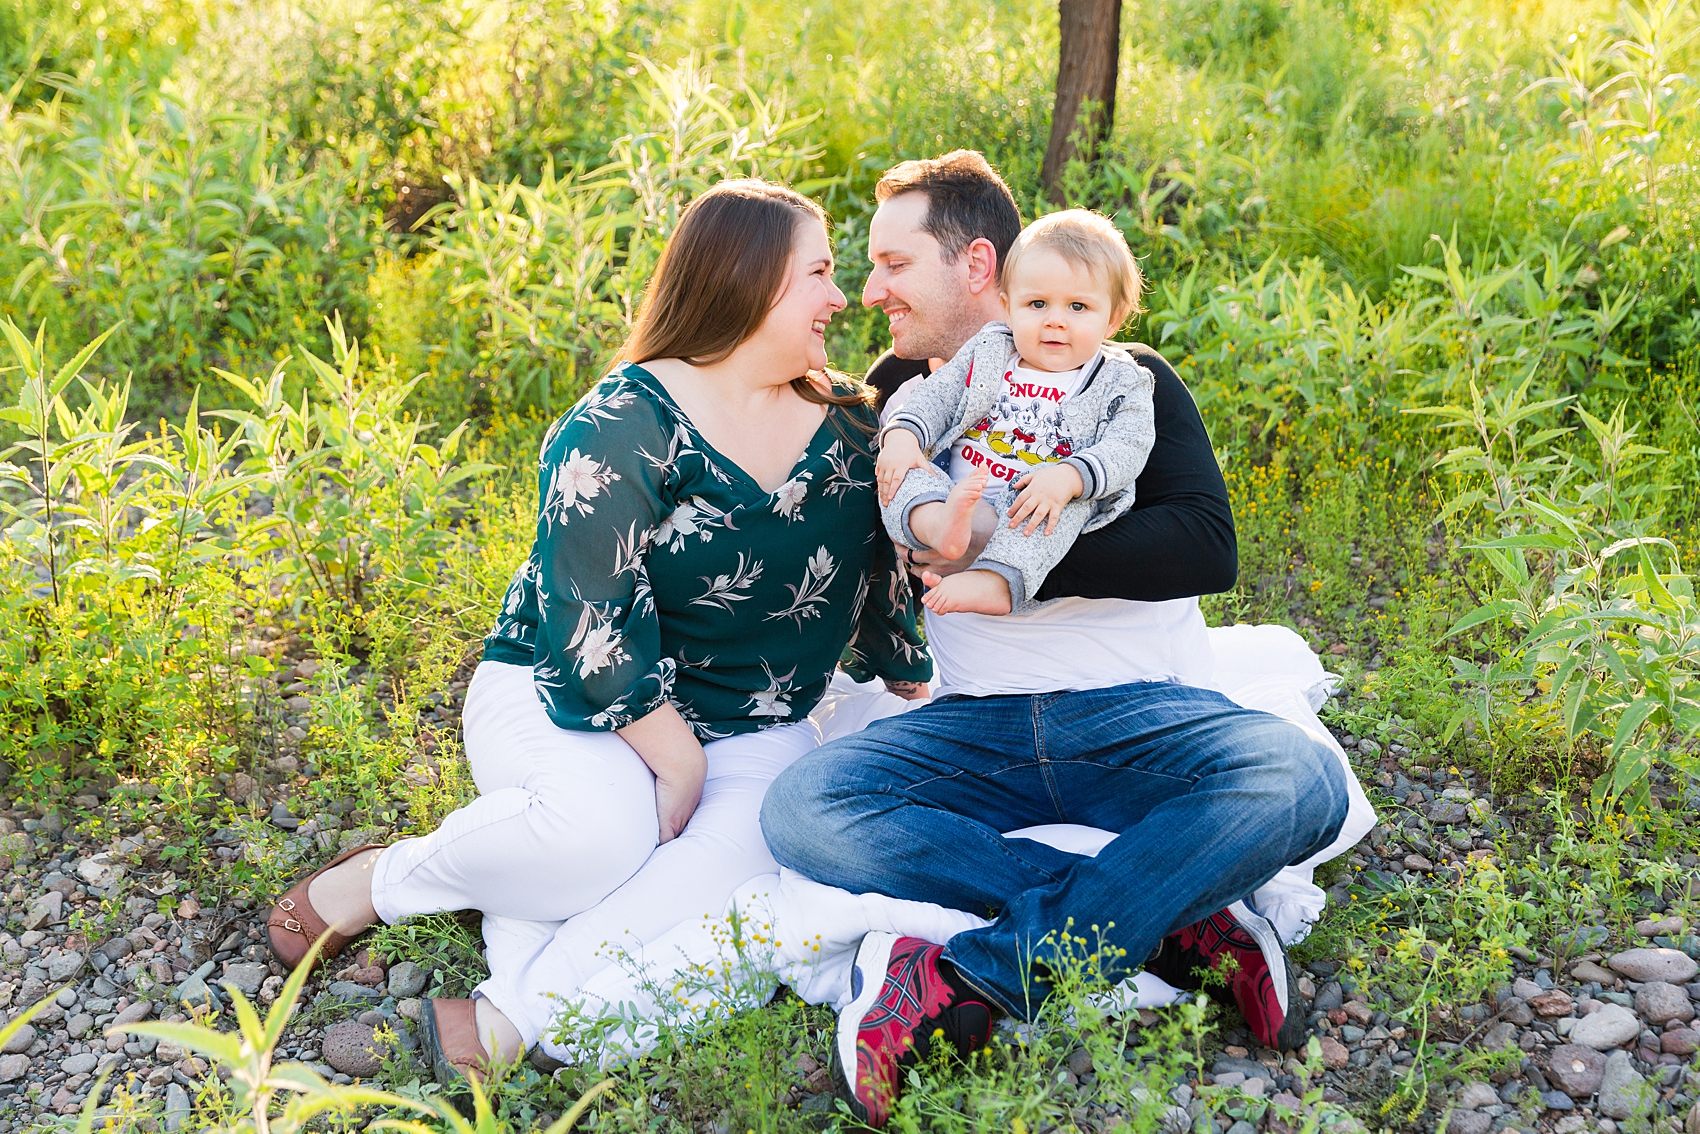 Leah Hope Photography | Scottsdale Phoenix Arizona Photographer | Downtown Phoenix | Family Photographer Family Photos | Green Nature Wash Location | Spring Pictures